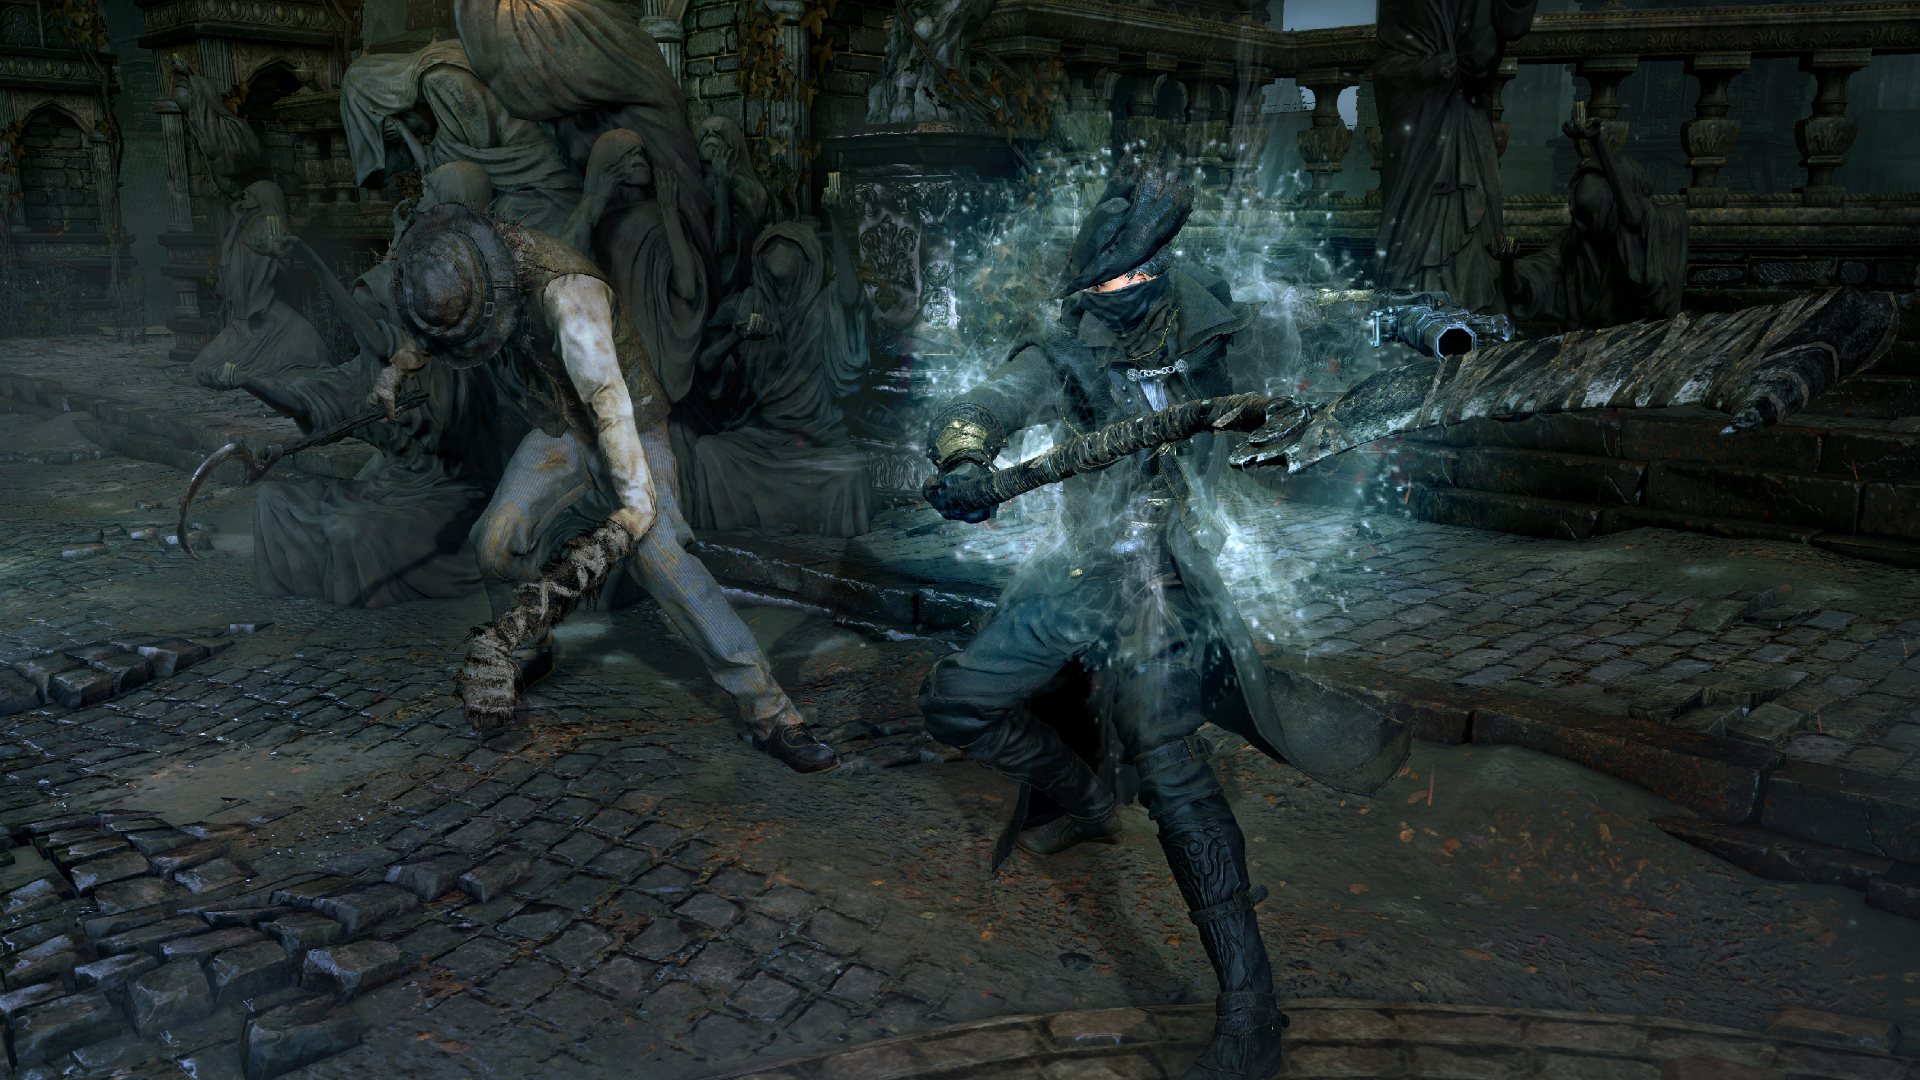 Bloodborne Set for Remastered PC and PS5 Release?